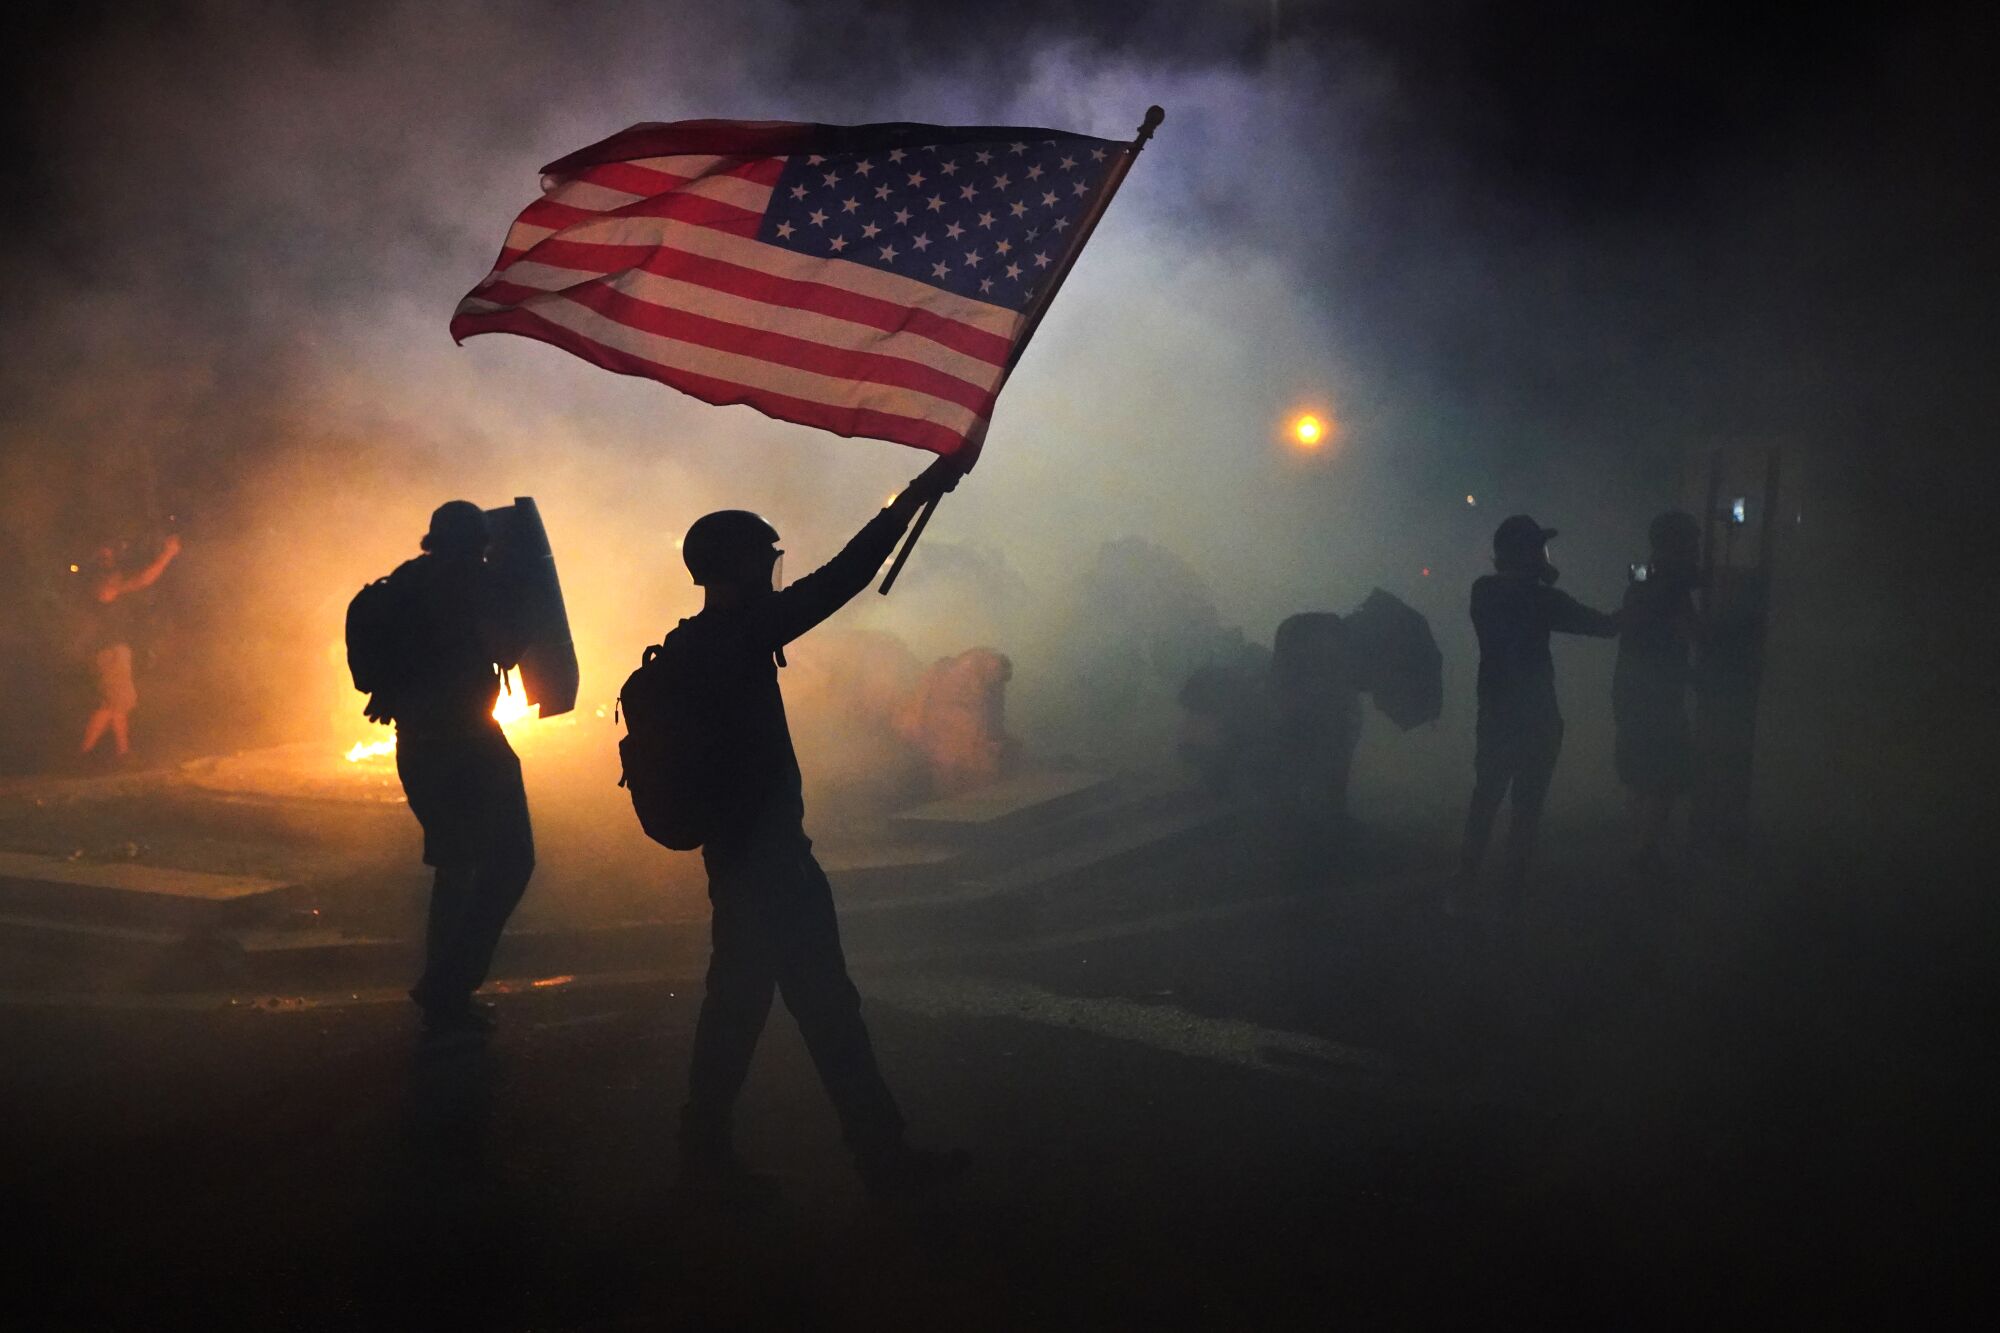 A protester waves an American flag.